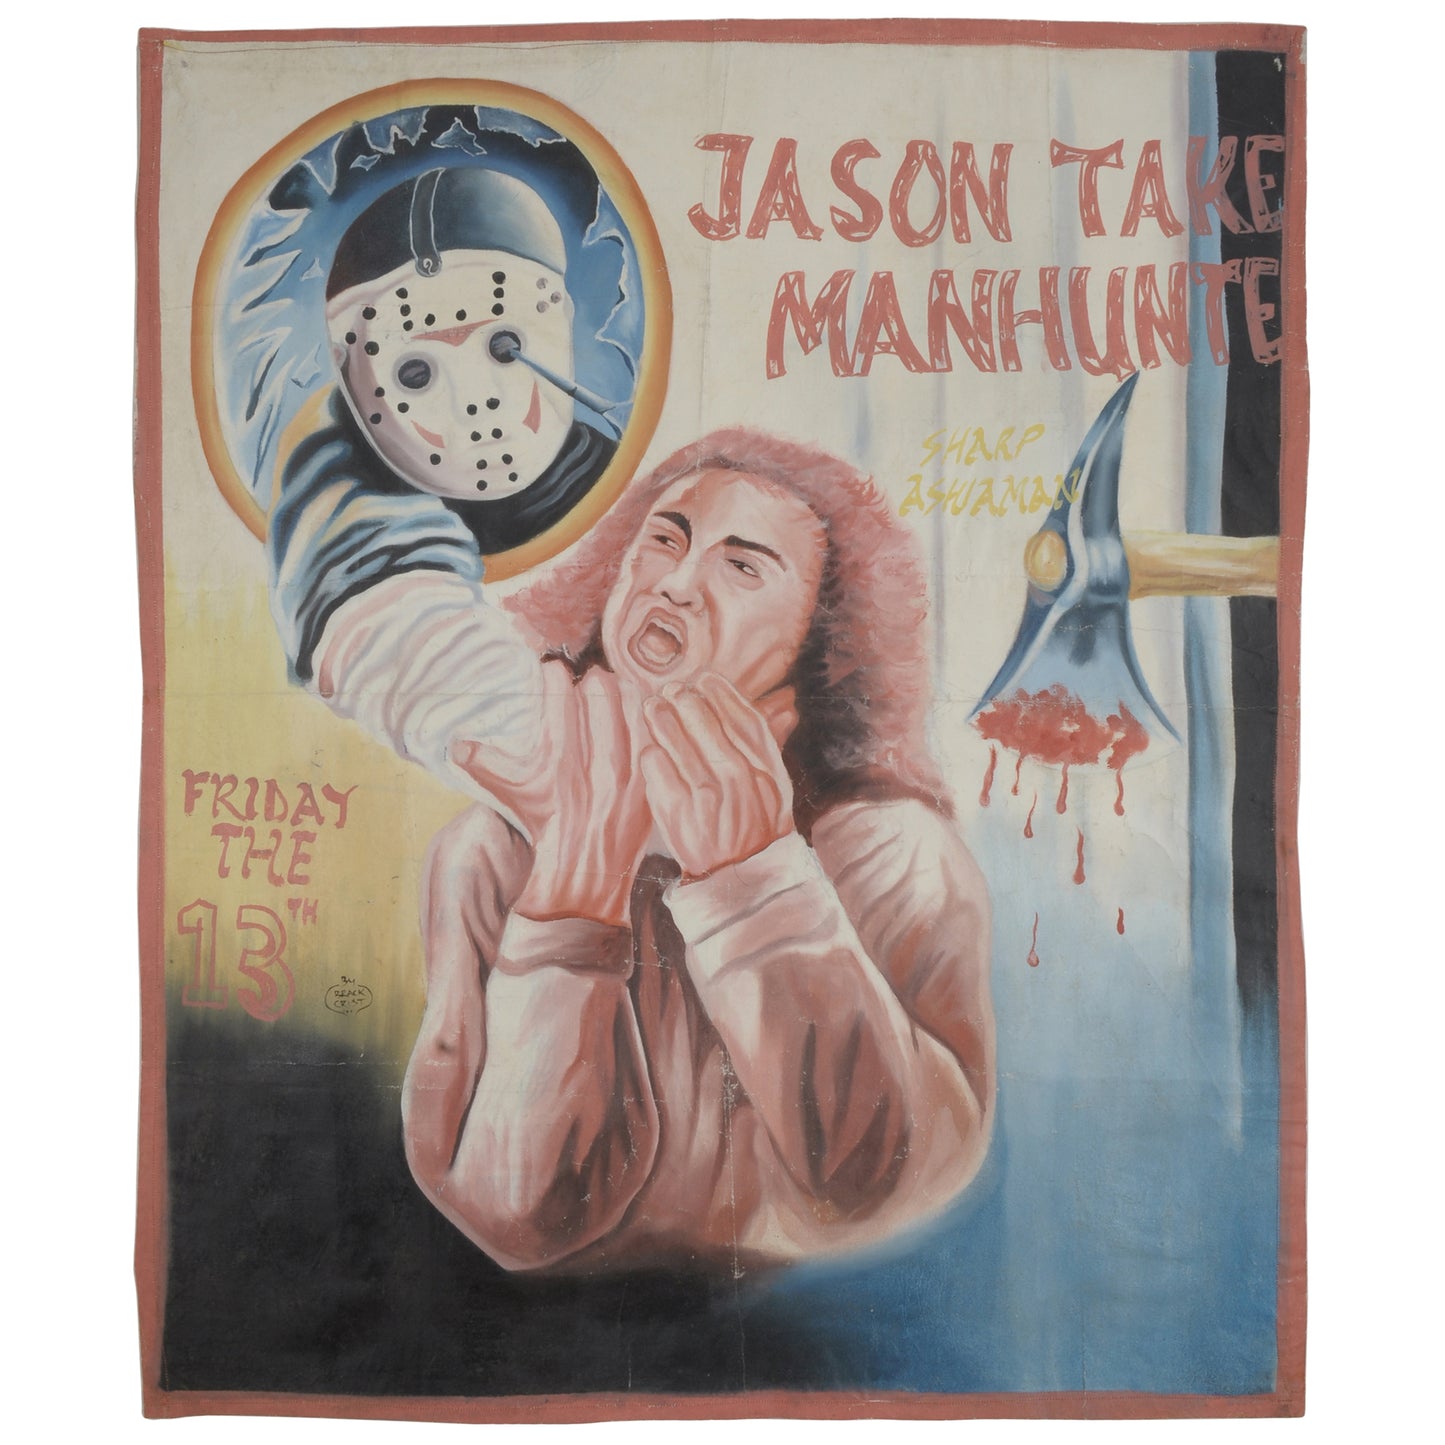 Friday the 13th: Jason Takes Manhattan Ghana movie poster hand painted